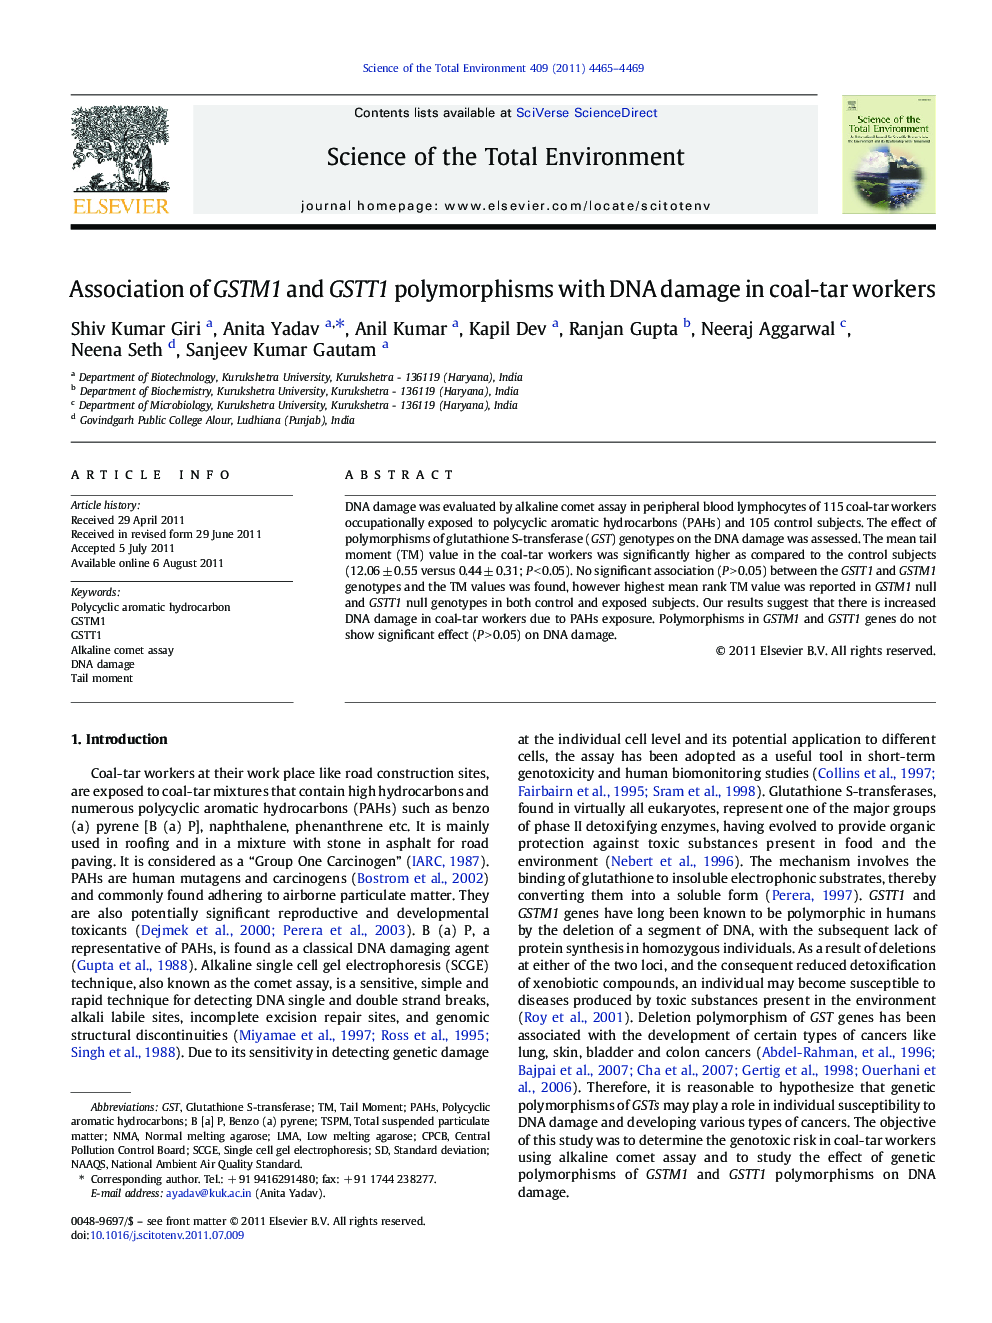 Association of GSTM1 and GSTT1 polymorphisms with DNA damage in coal-tar workers